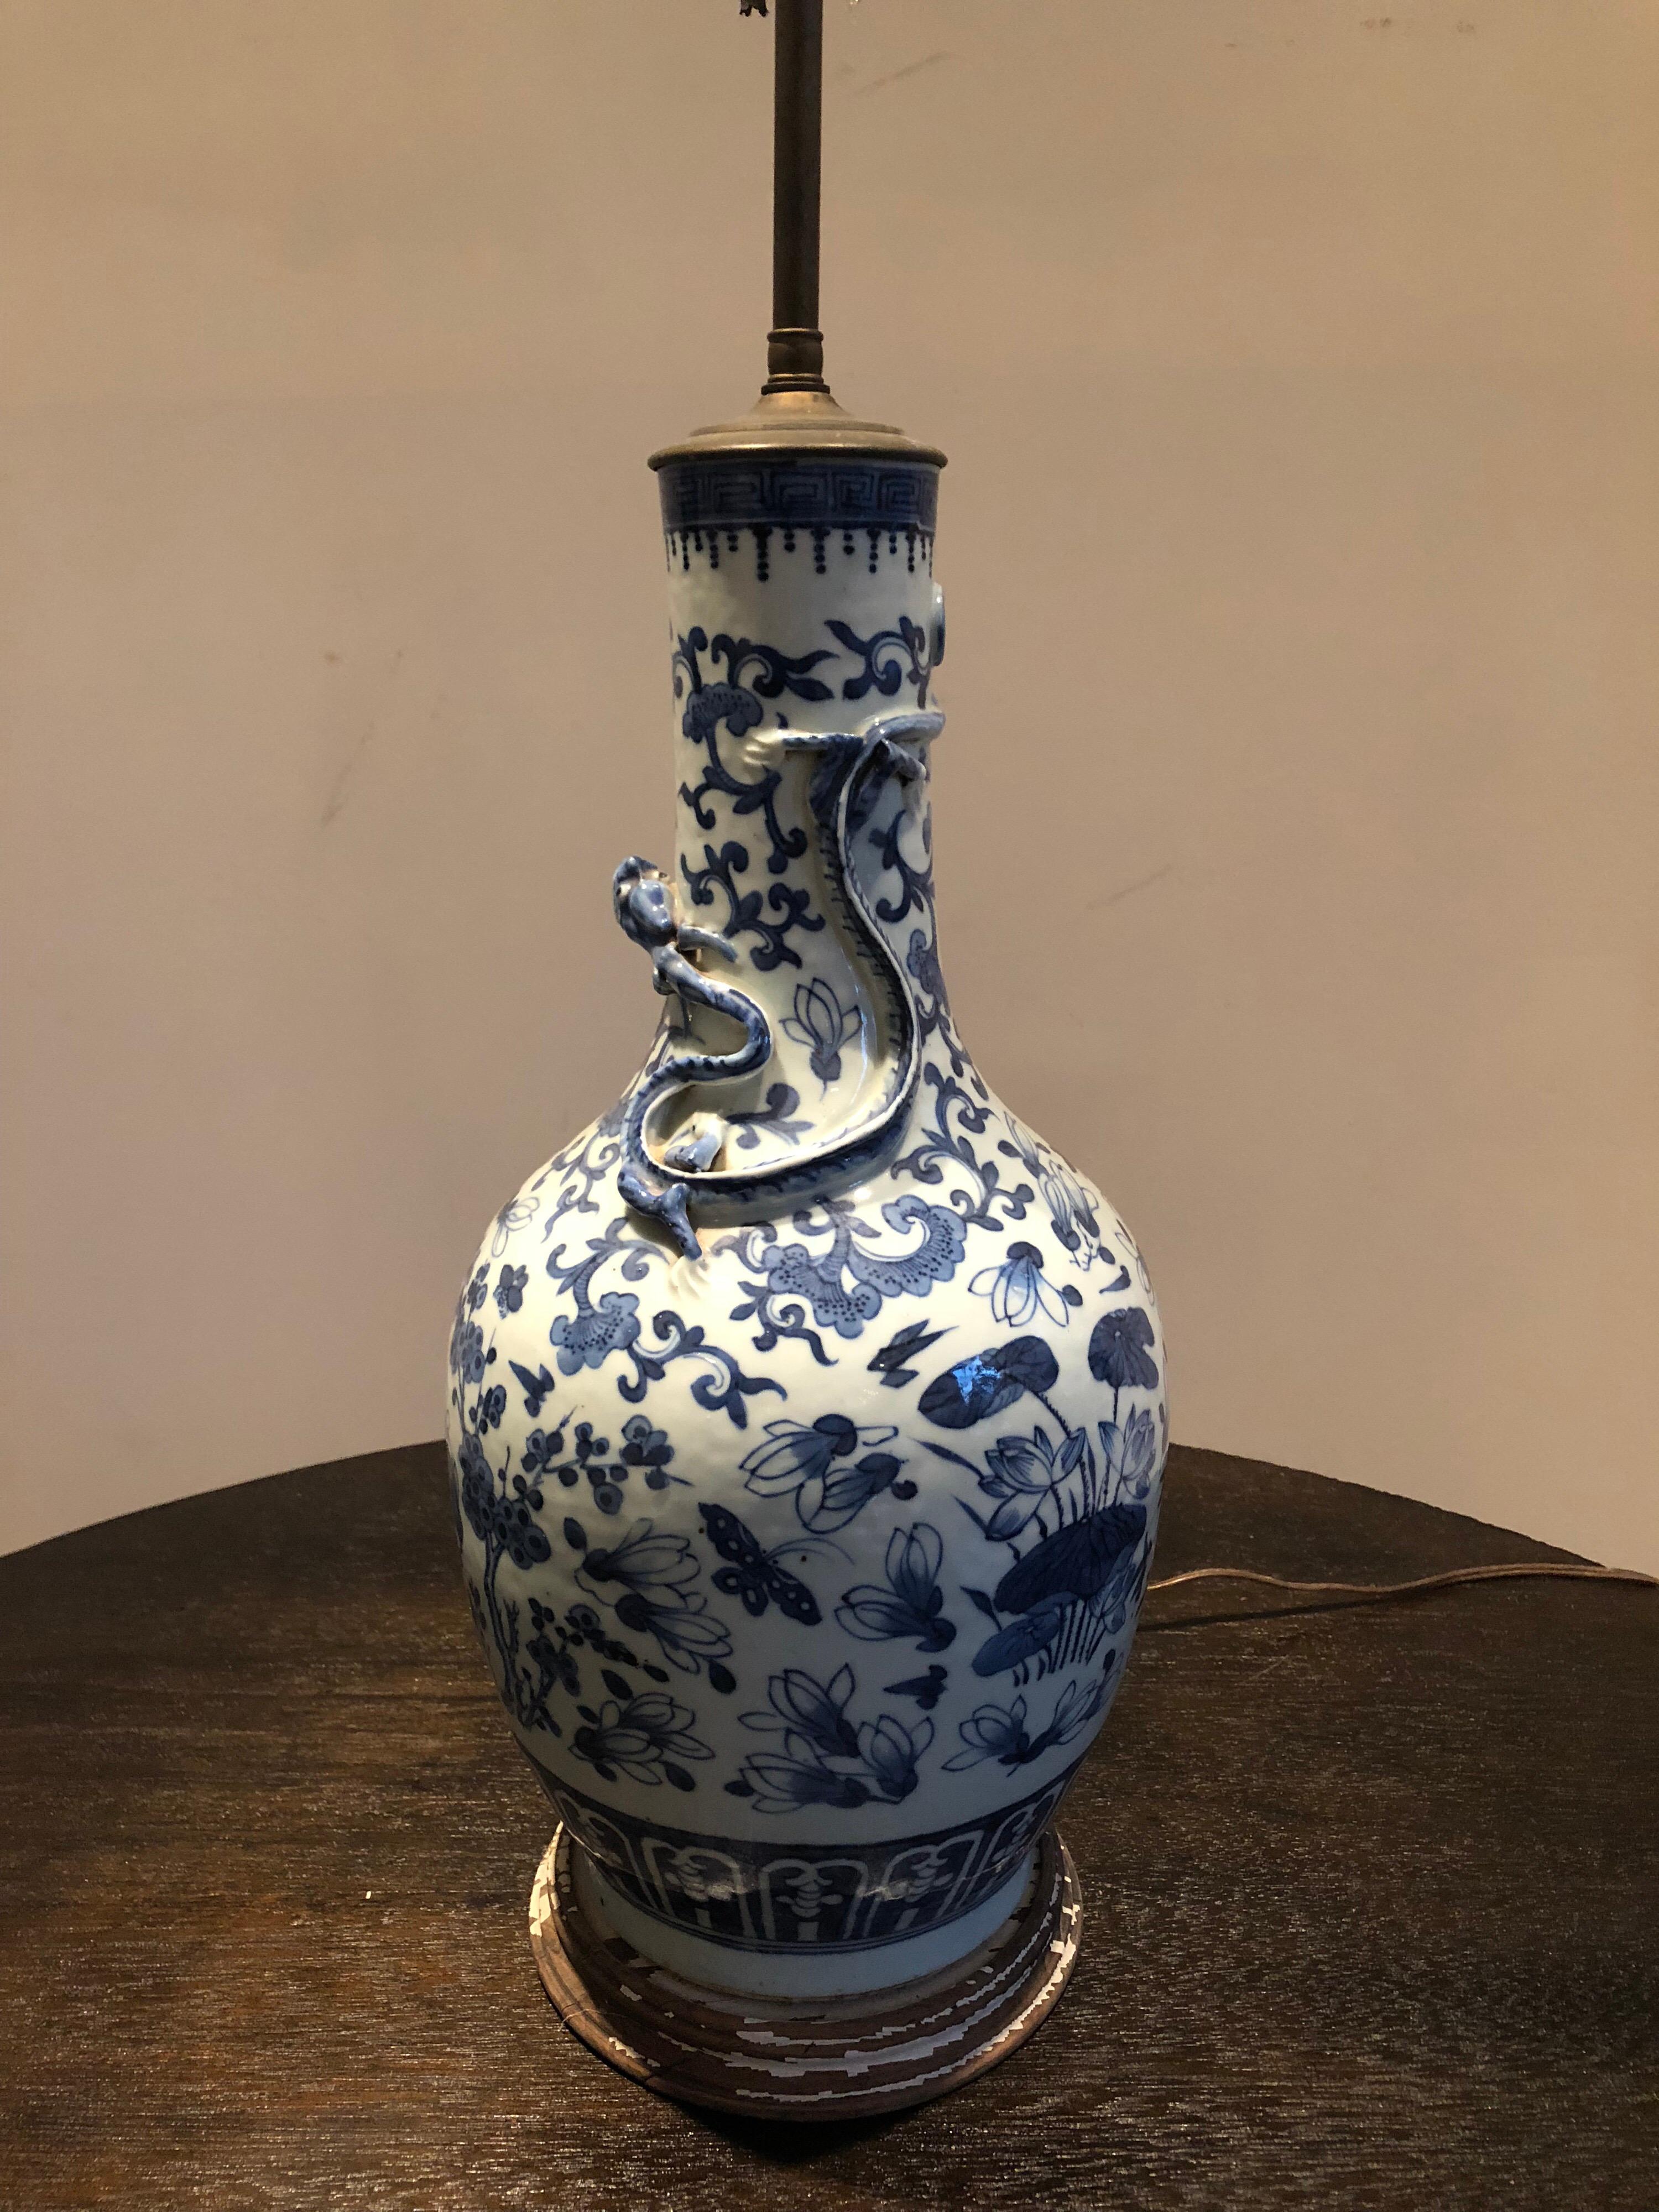 A blue and white motif Chinese export vase, now as lamp. Interesting raised dragon detail. Distress painted base. Two sockets. Shade for display purposes only. Vase measures 19